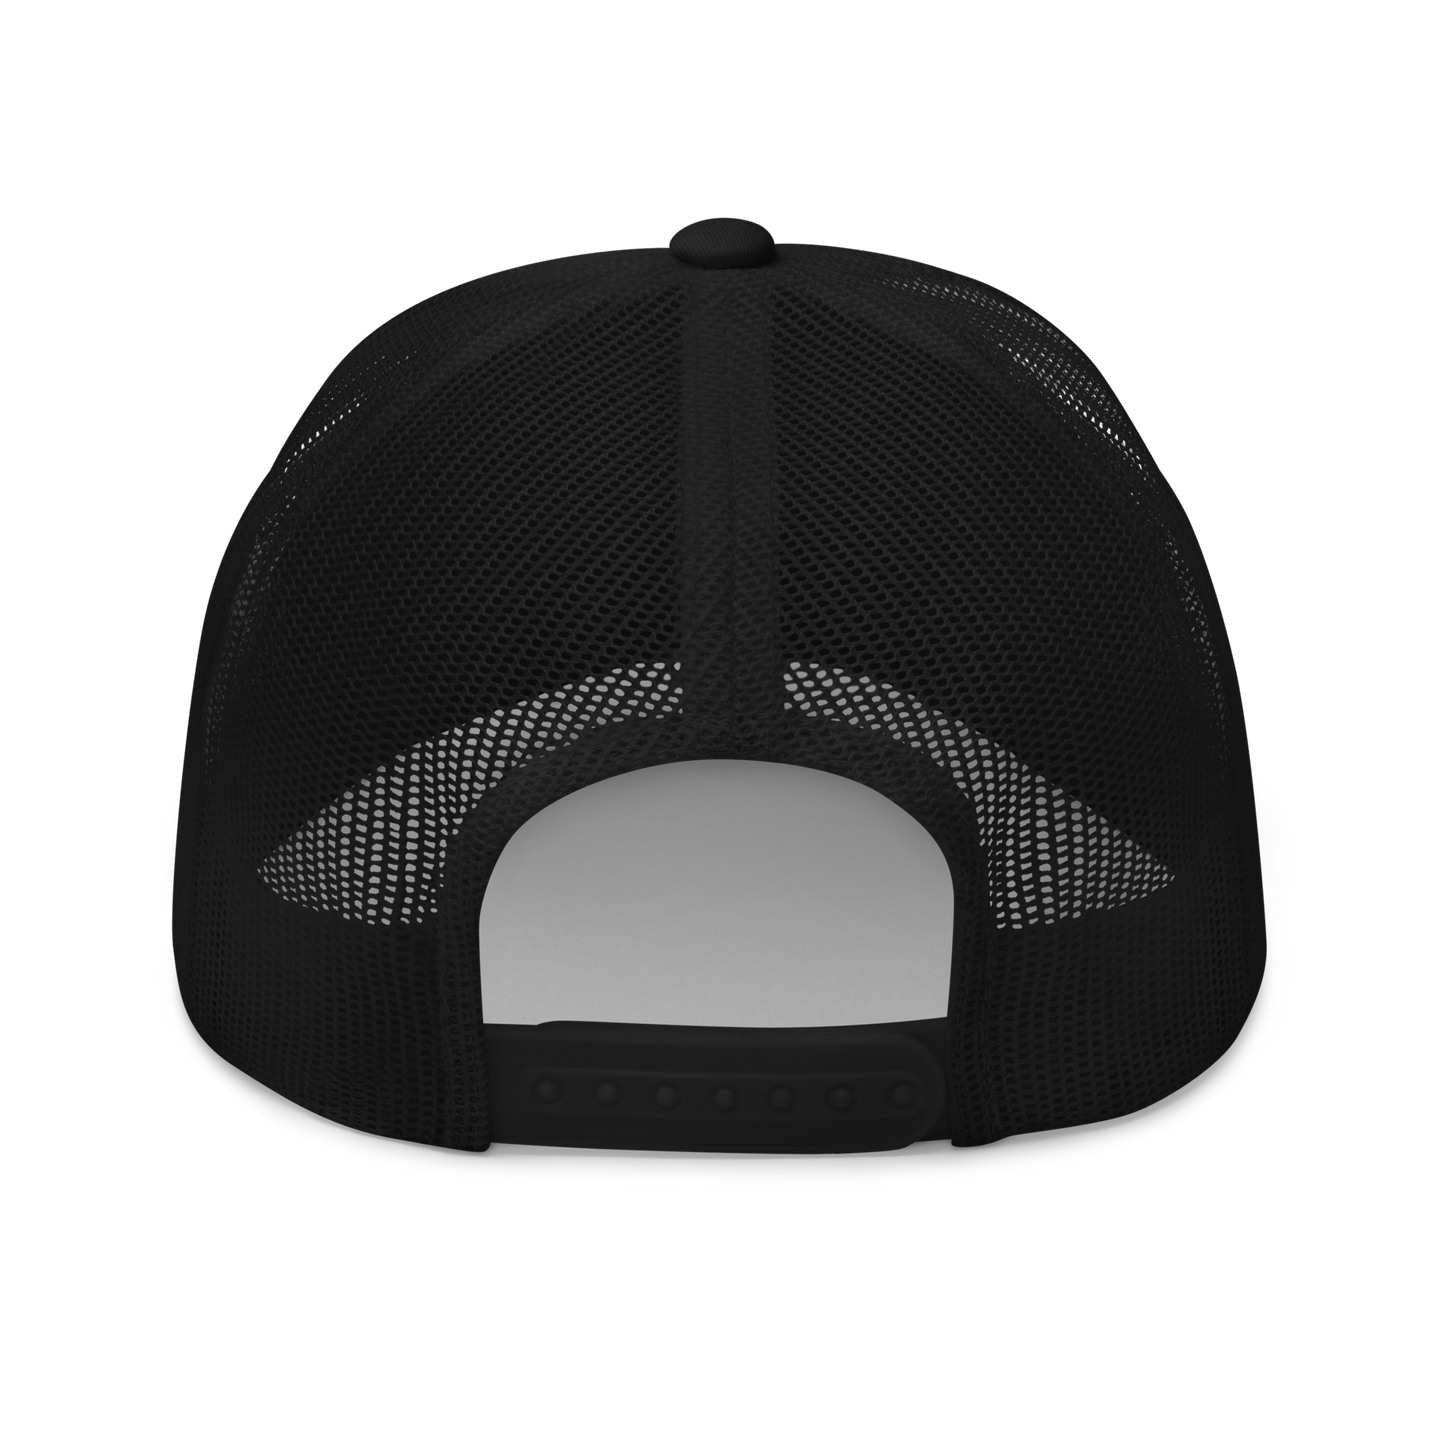 It's A Beautiful Day To Be Black Mesh Trucker Hat